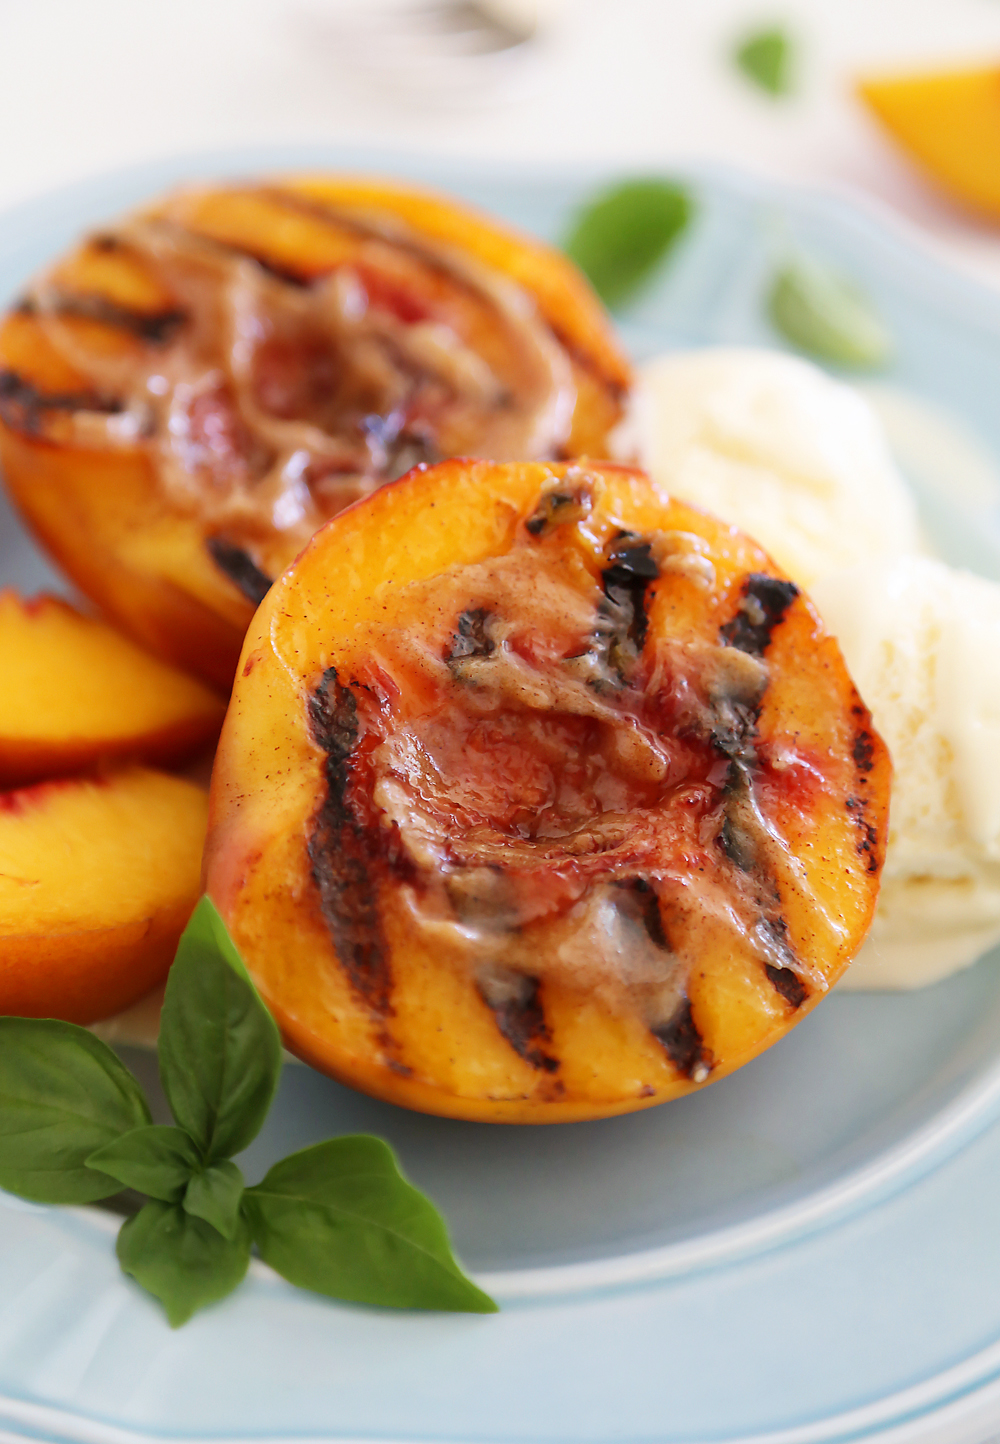 Grilled Peaches with Cinnamon-Sugar Butter – Juicy, sweet grilled summer peaches make a mouthwatering dessert with vanilla ice cream or whipped cream! thecomfortofcooking.com